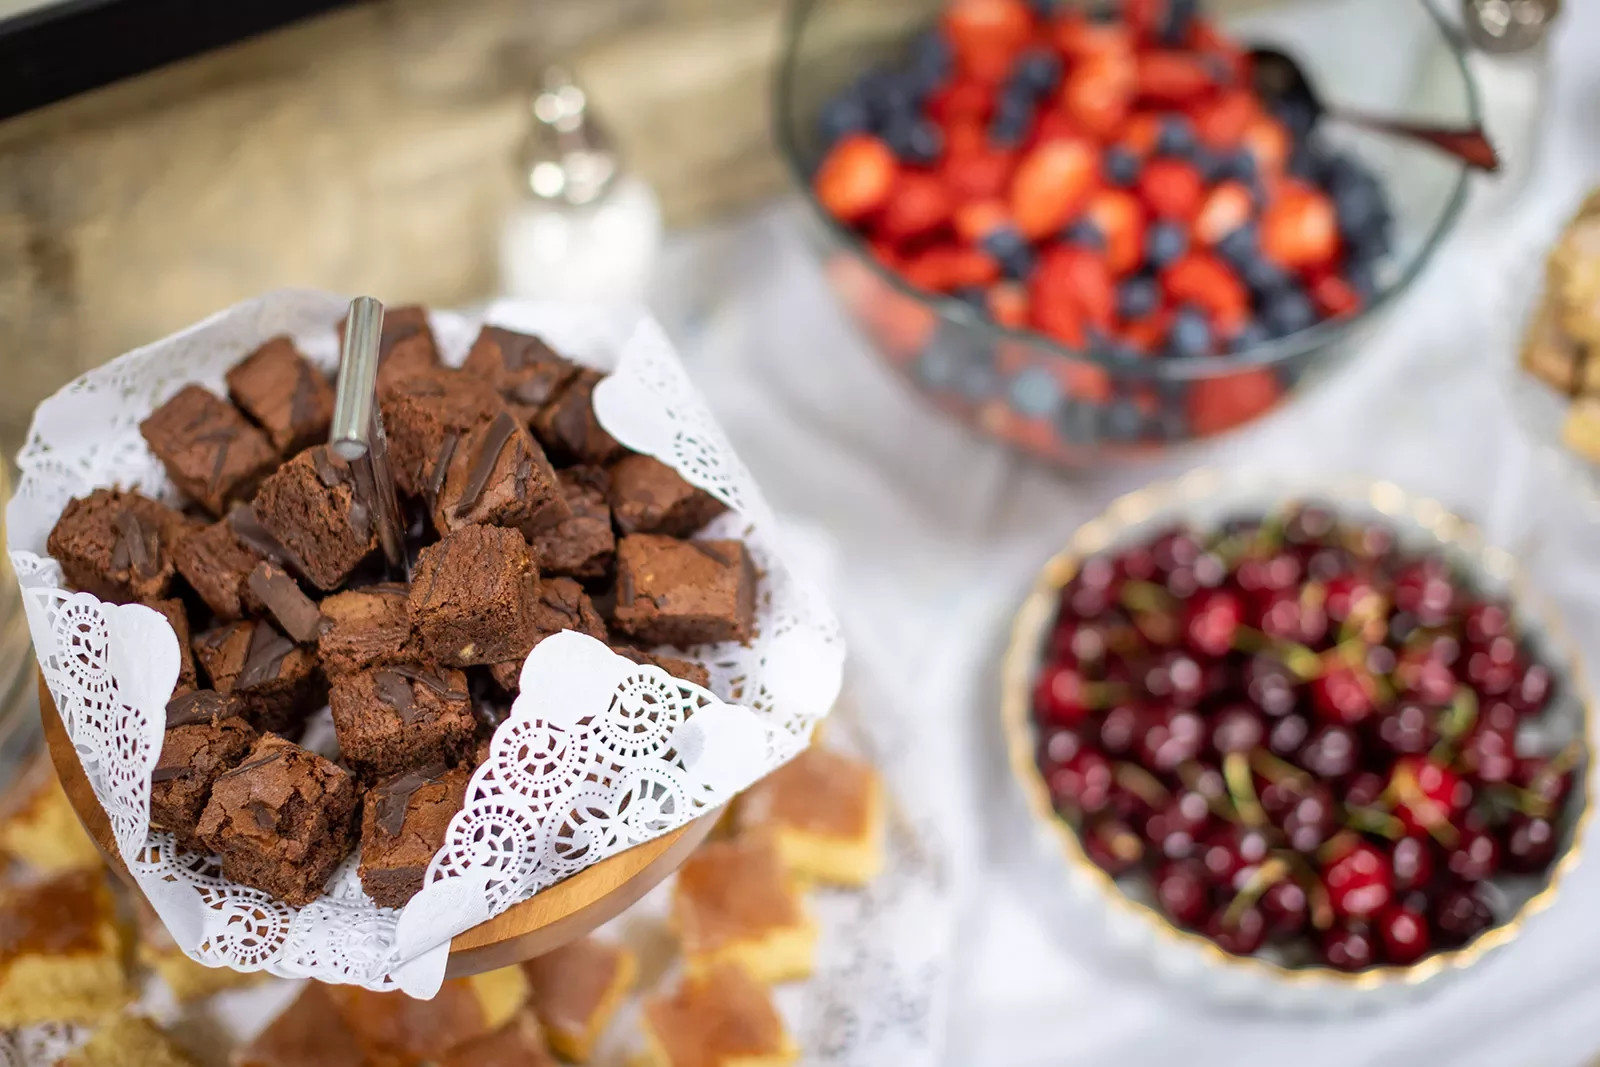 Display of fruit, berries and small brownie bites.